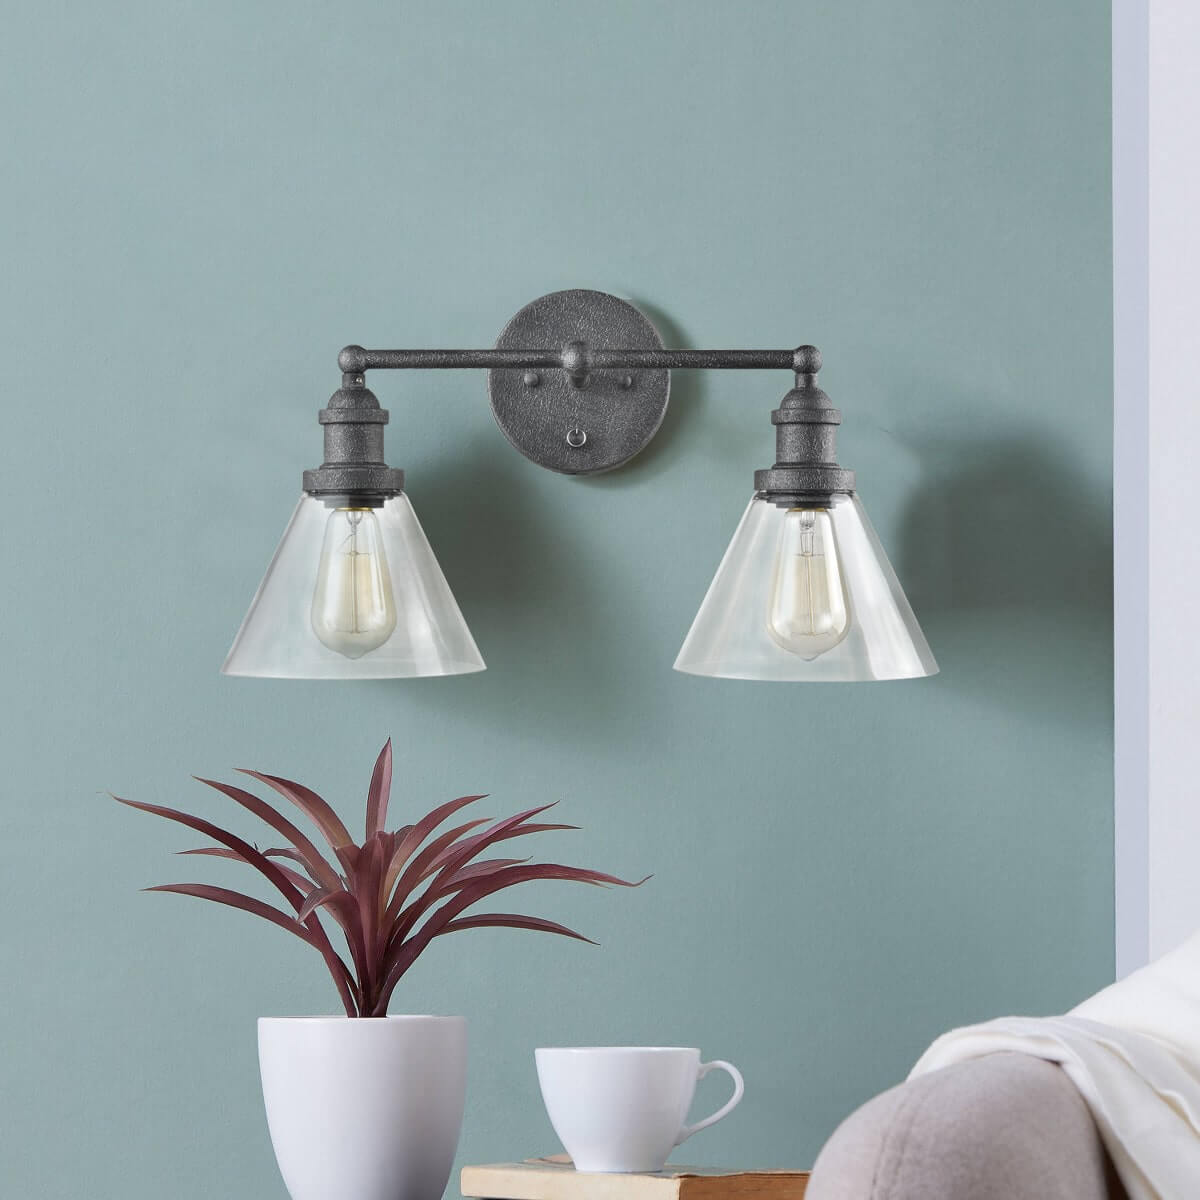 Vintage Plug-in Glass Wall Sconce Double Light Bell Shape